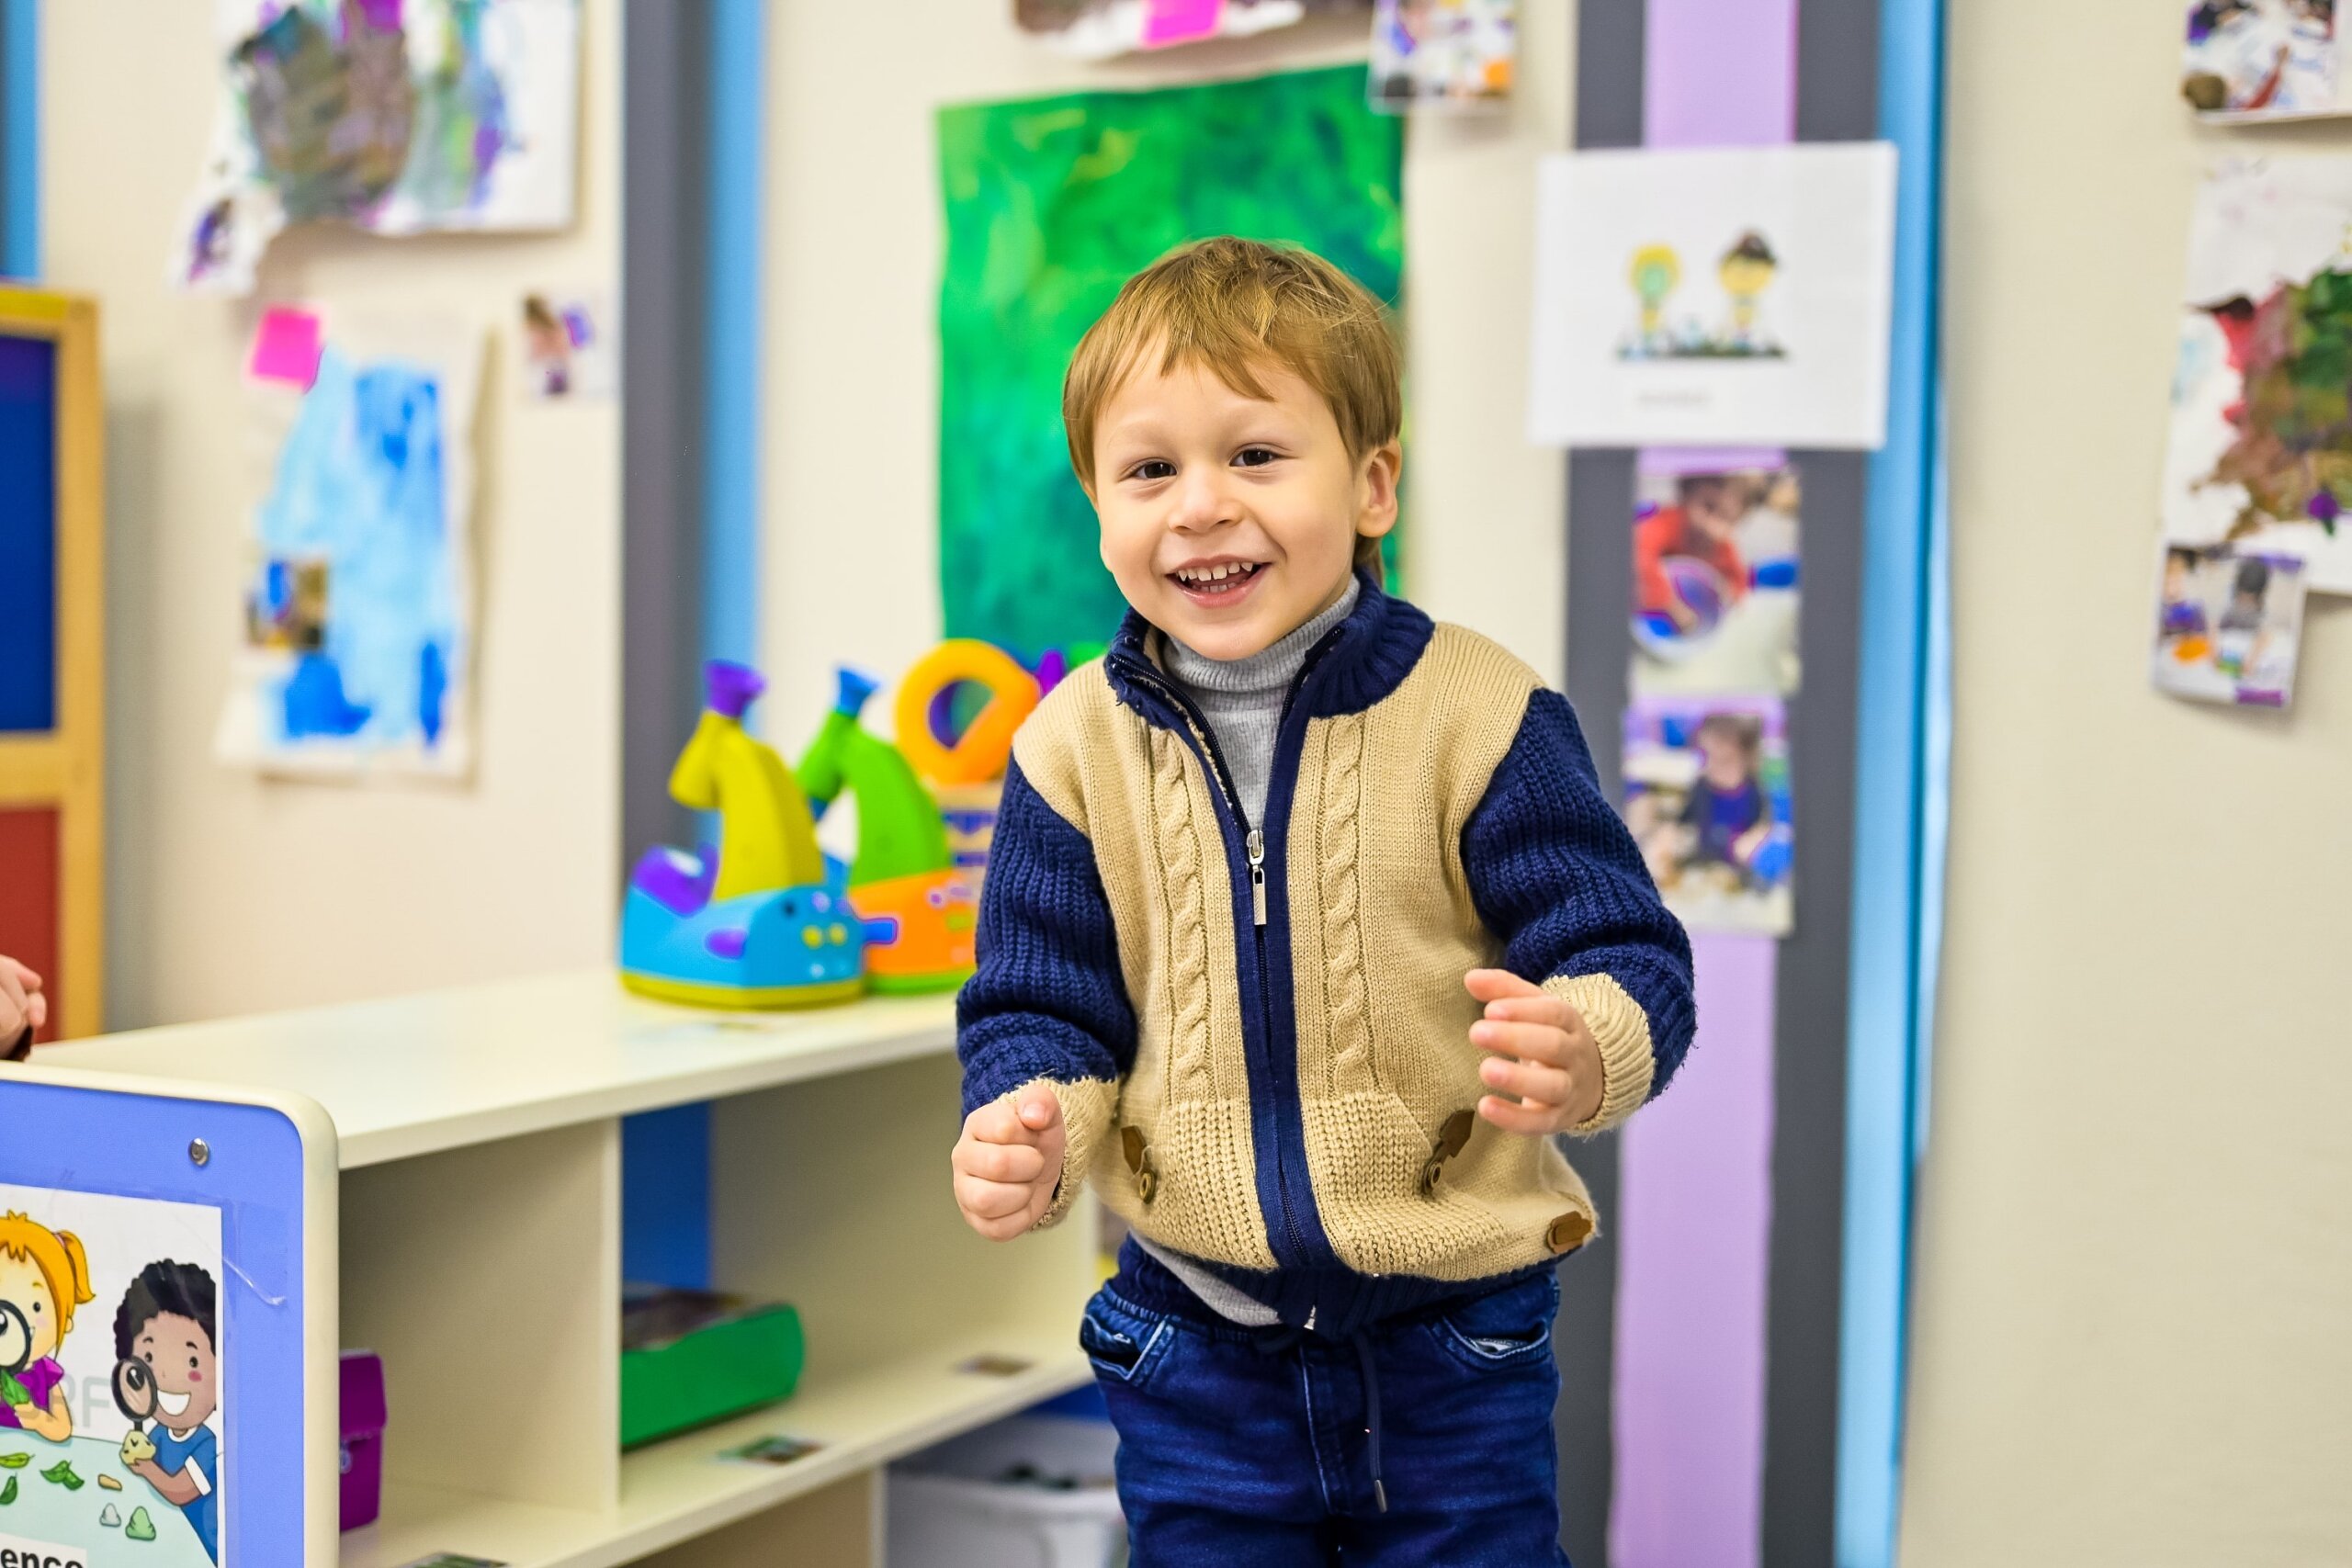 Toddler smiling in a classroom environment to illustrate vocabulary development support